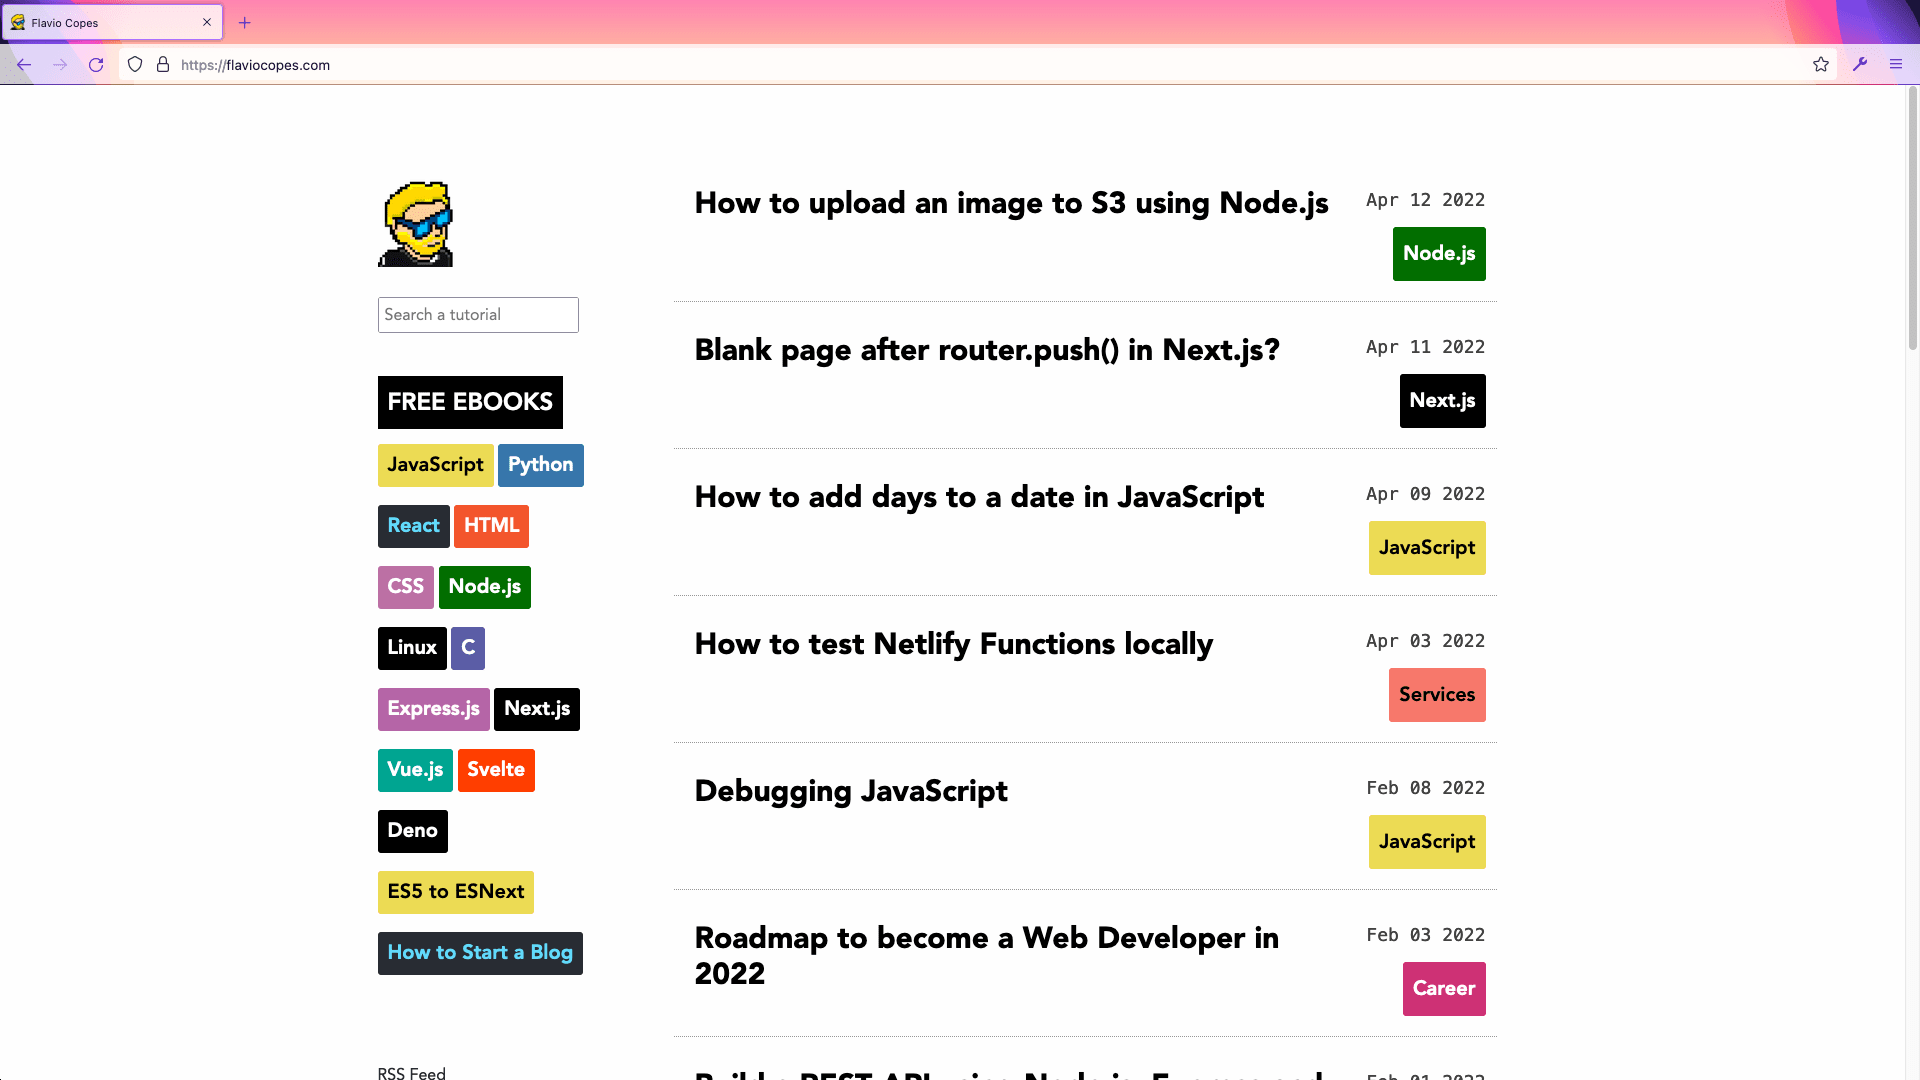 Flavio Copes' blog homepage showcasing their most recent blog posts like: "How to upload an image to S3 using Node.js" and "Blank page after router.push() in Next.js?".